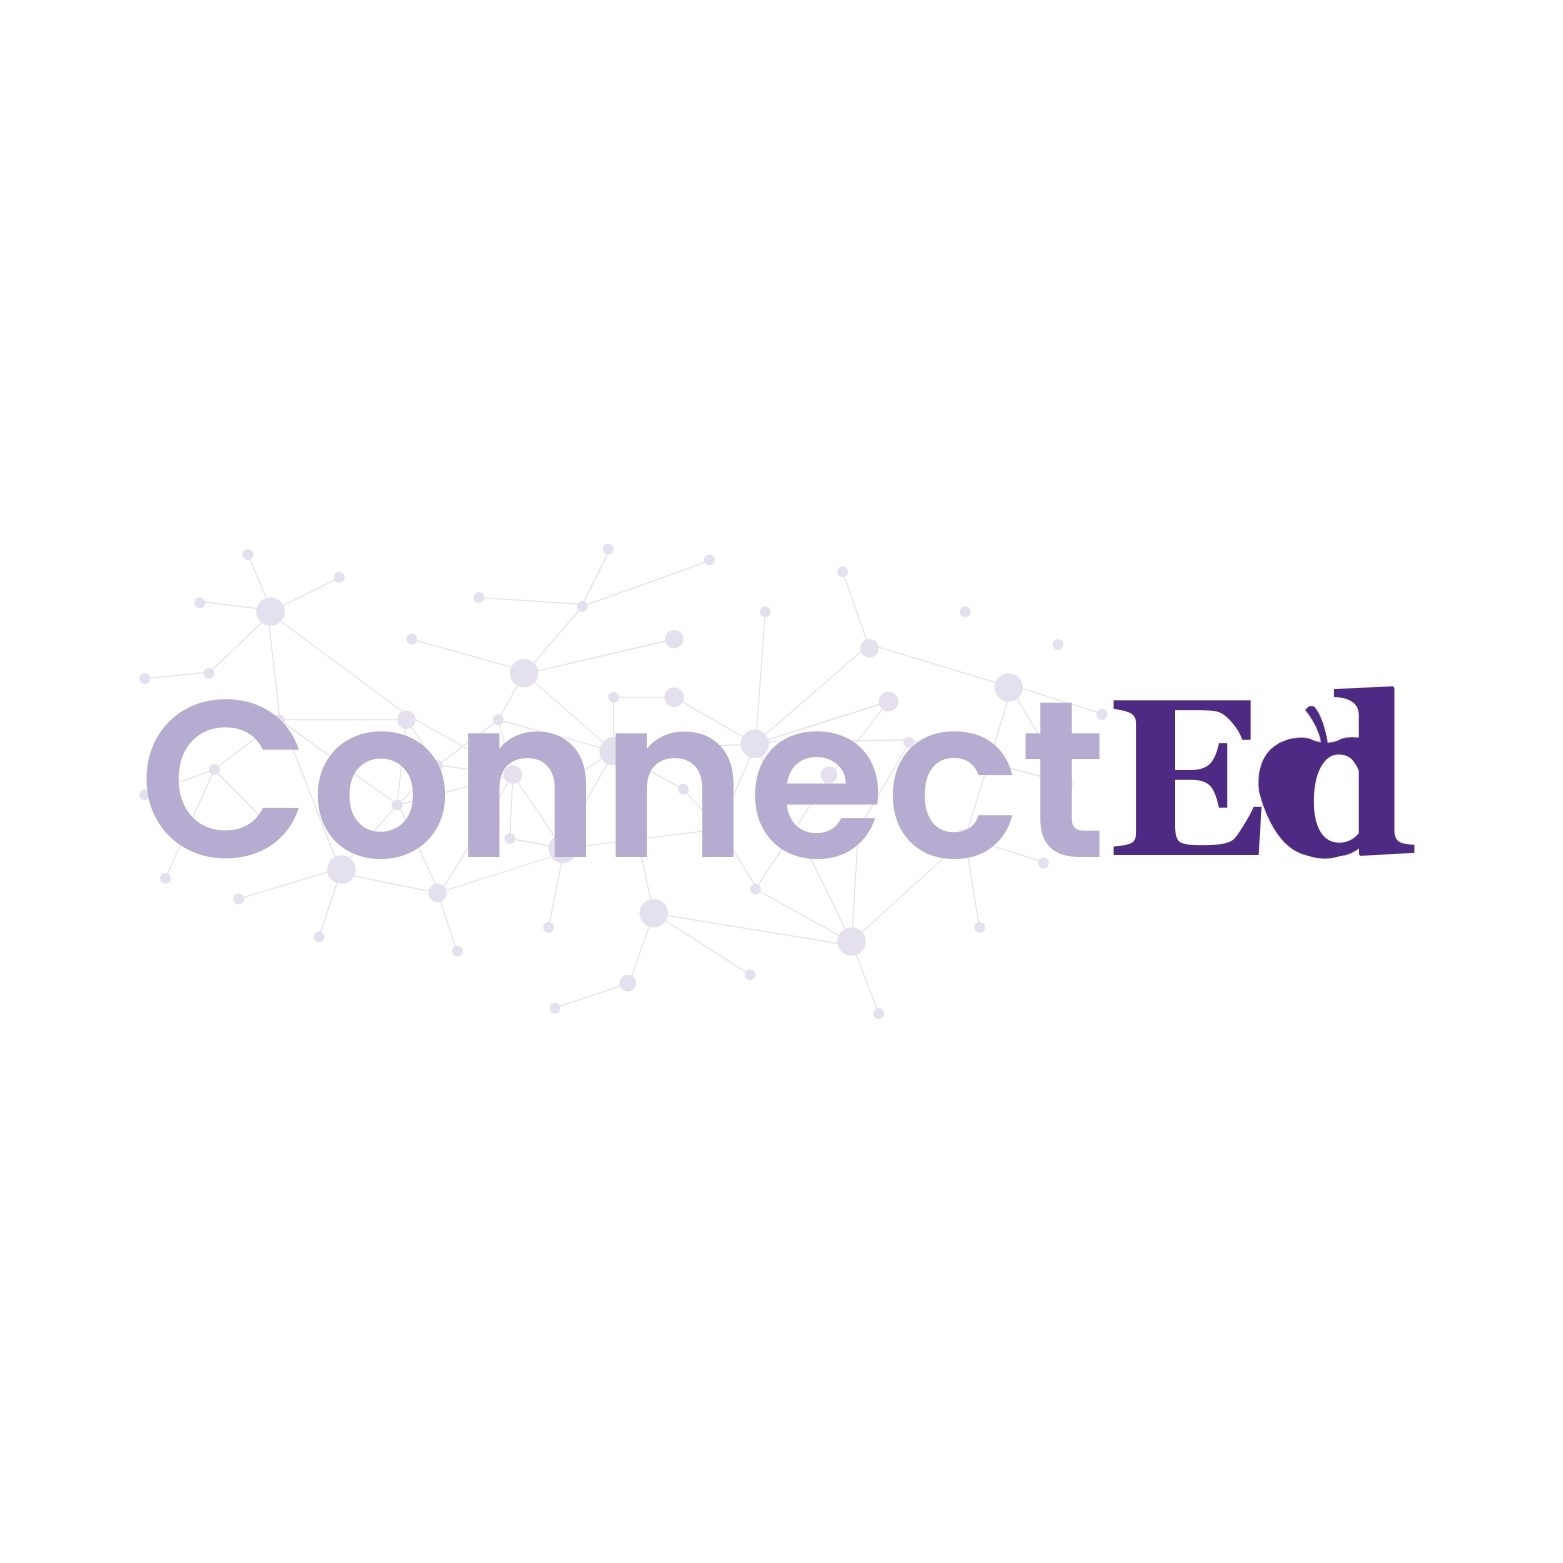 Logo for the ConnectEd Conference